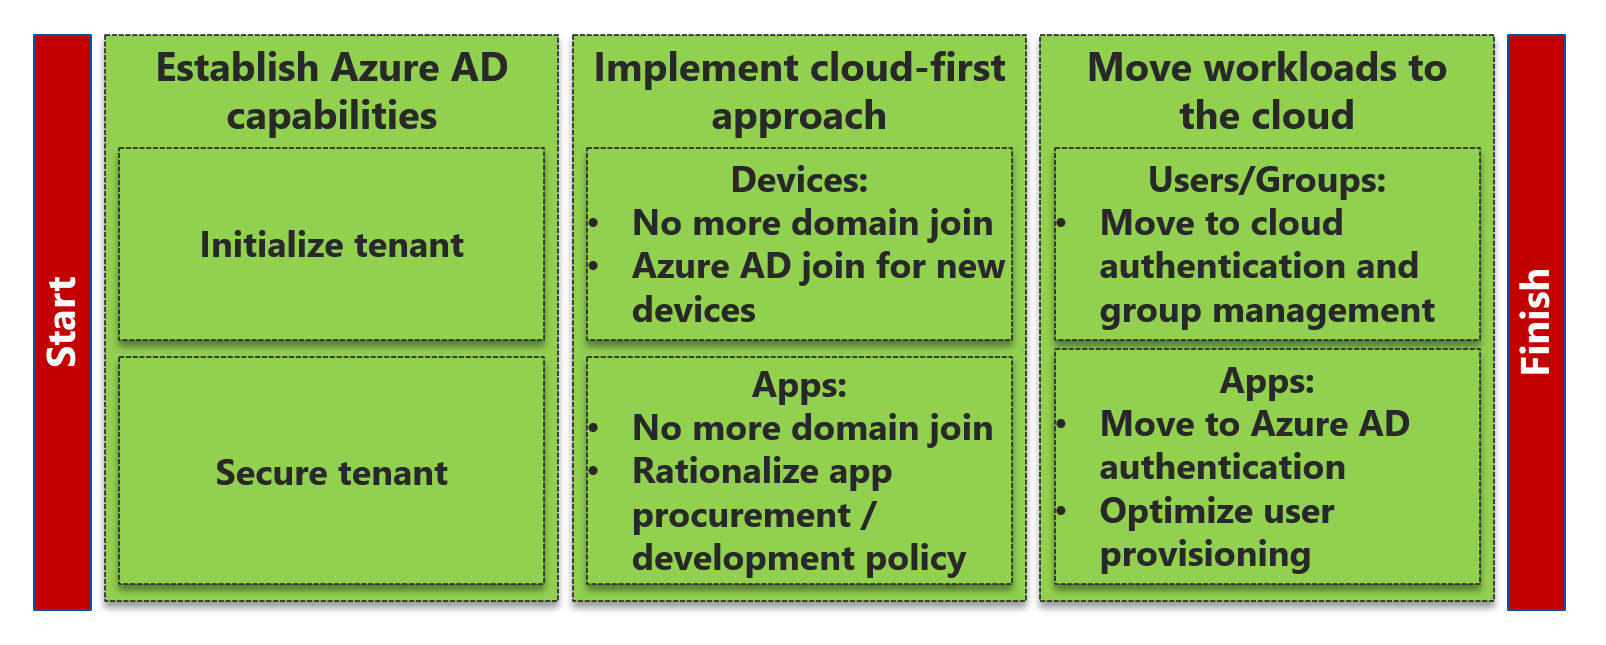 Chart that shows three major milestones in migrating from Active Directory to Microsoft Entra ID: establish Microsoft Entra capabilities, implement a cloud-first approach, and move workloads to the cloud.